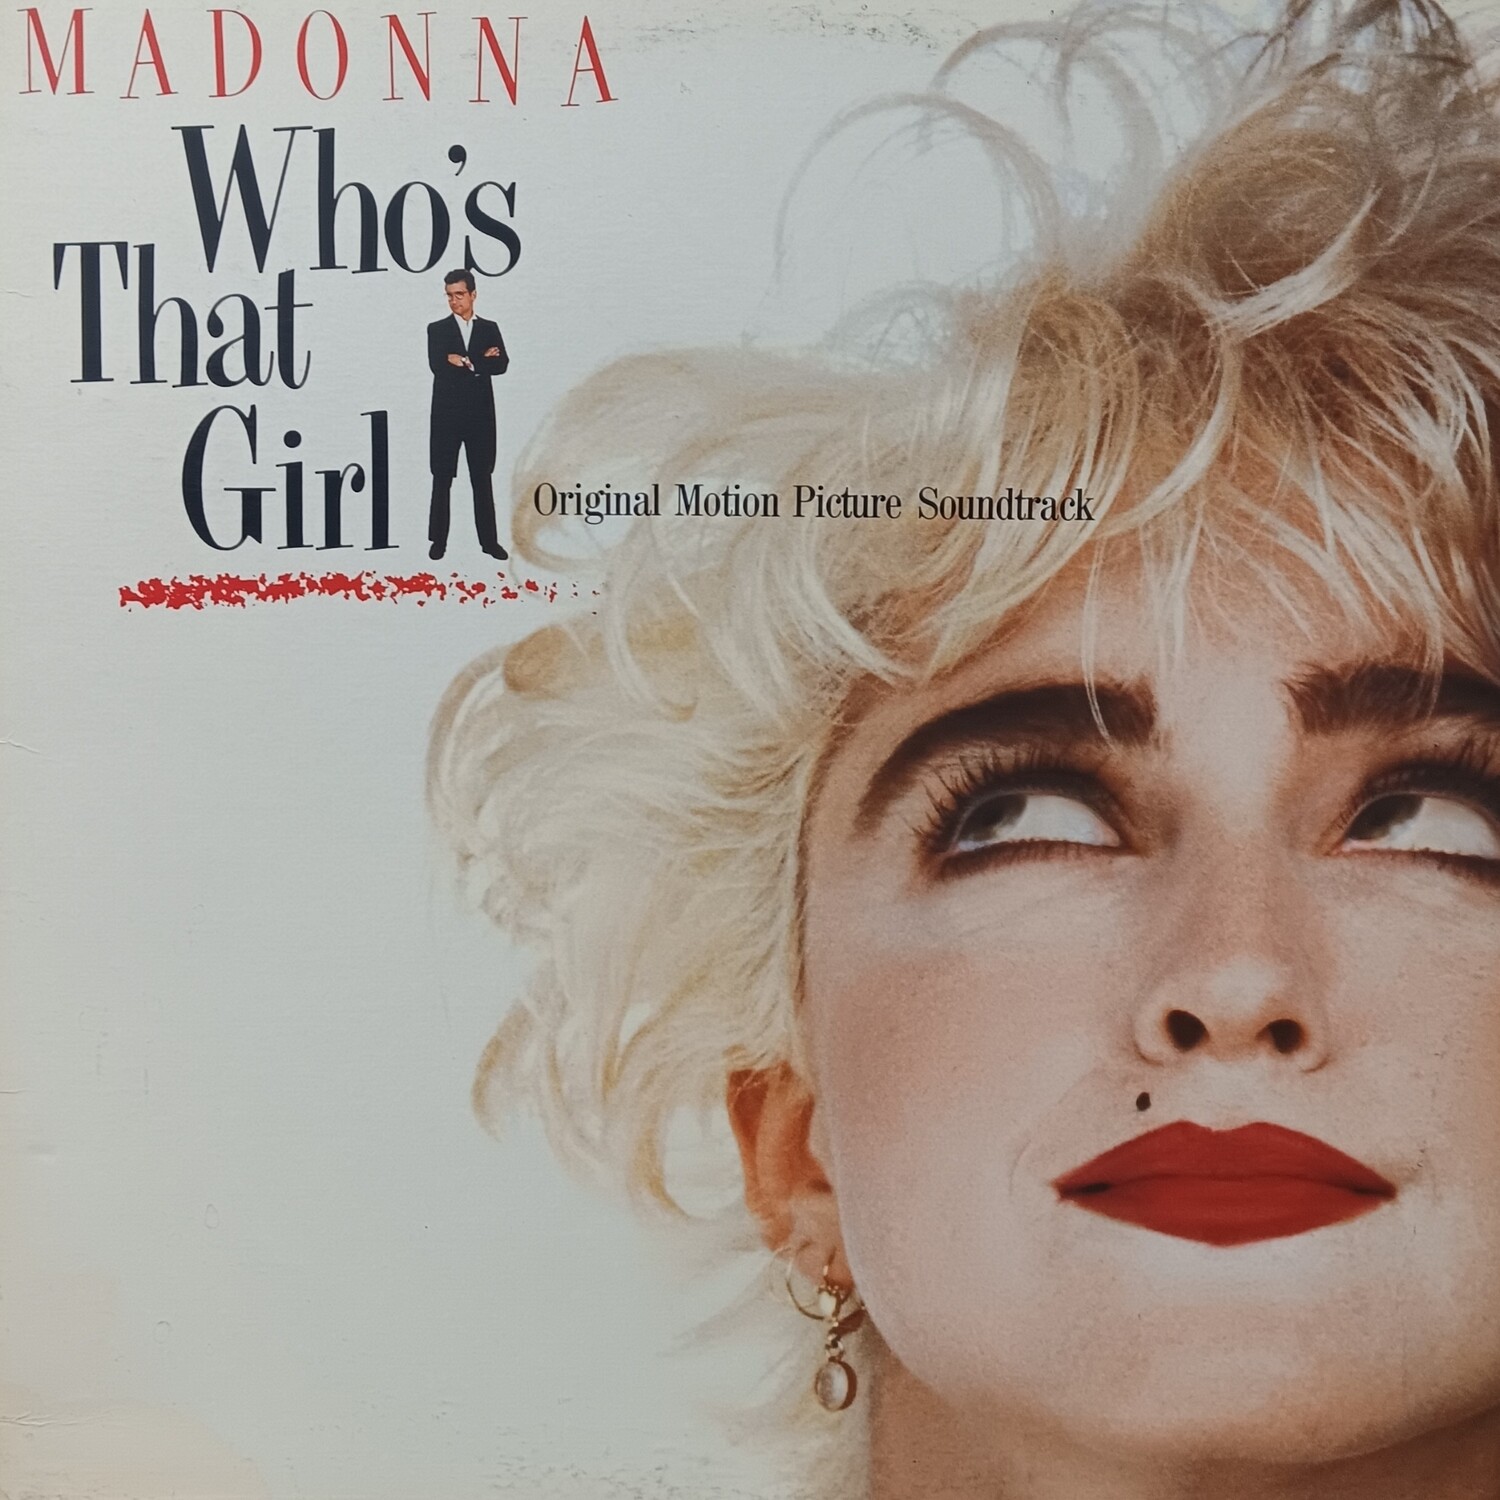 MADONNA - Who's that girl